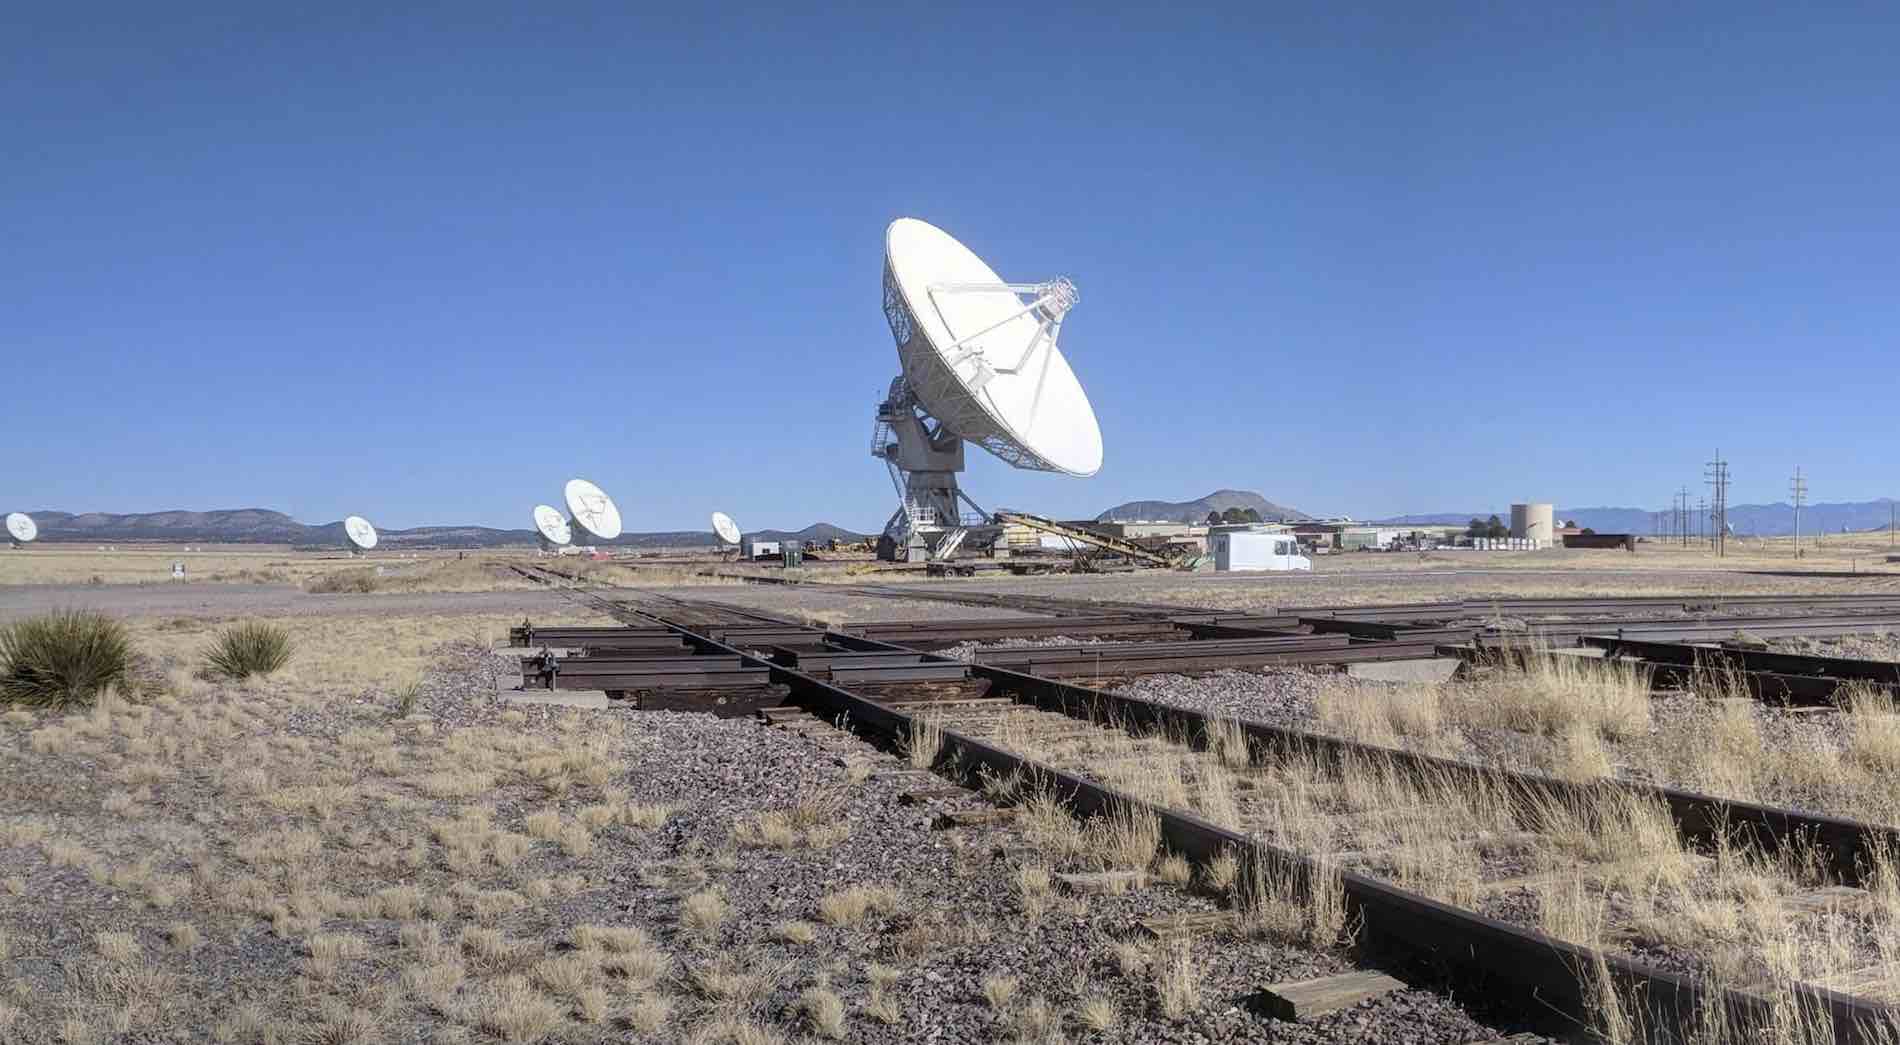 search for extraterrestrial intelligence